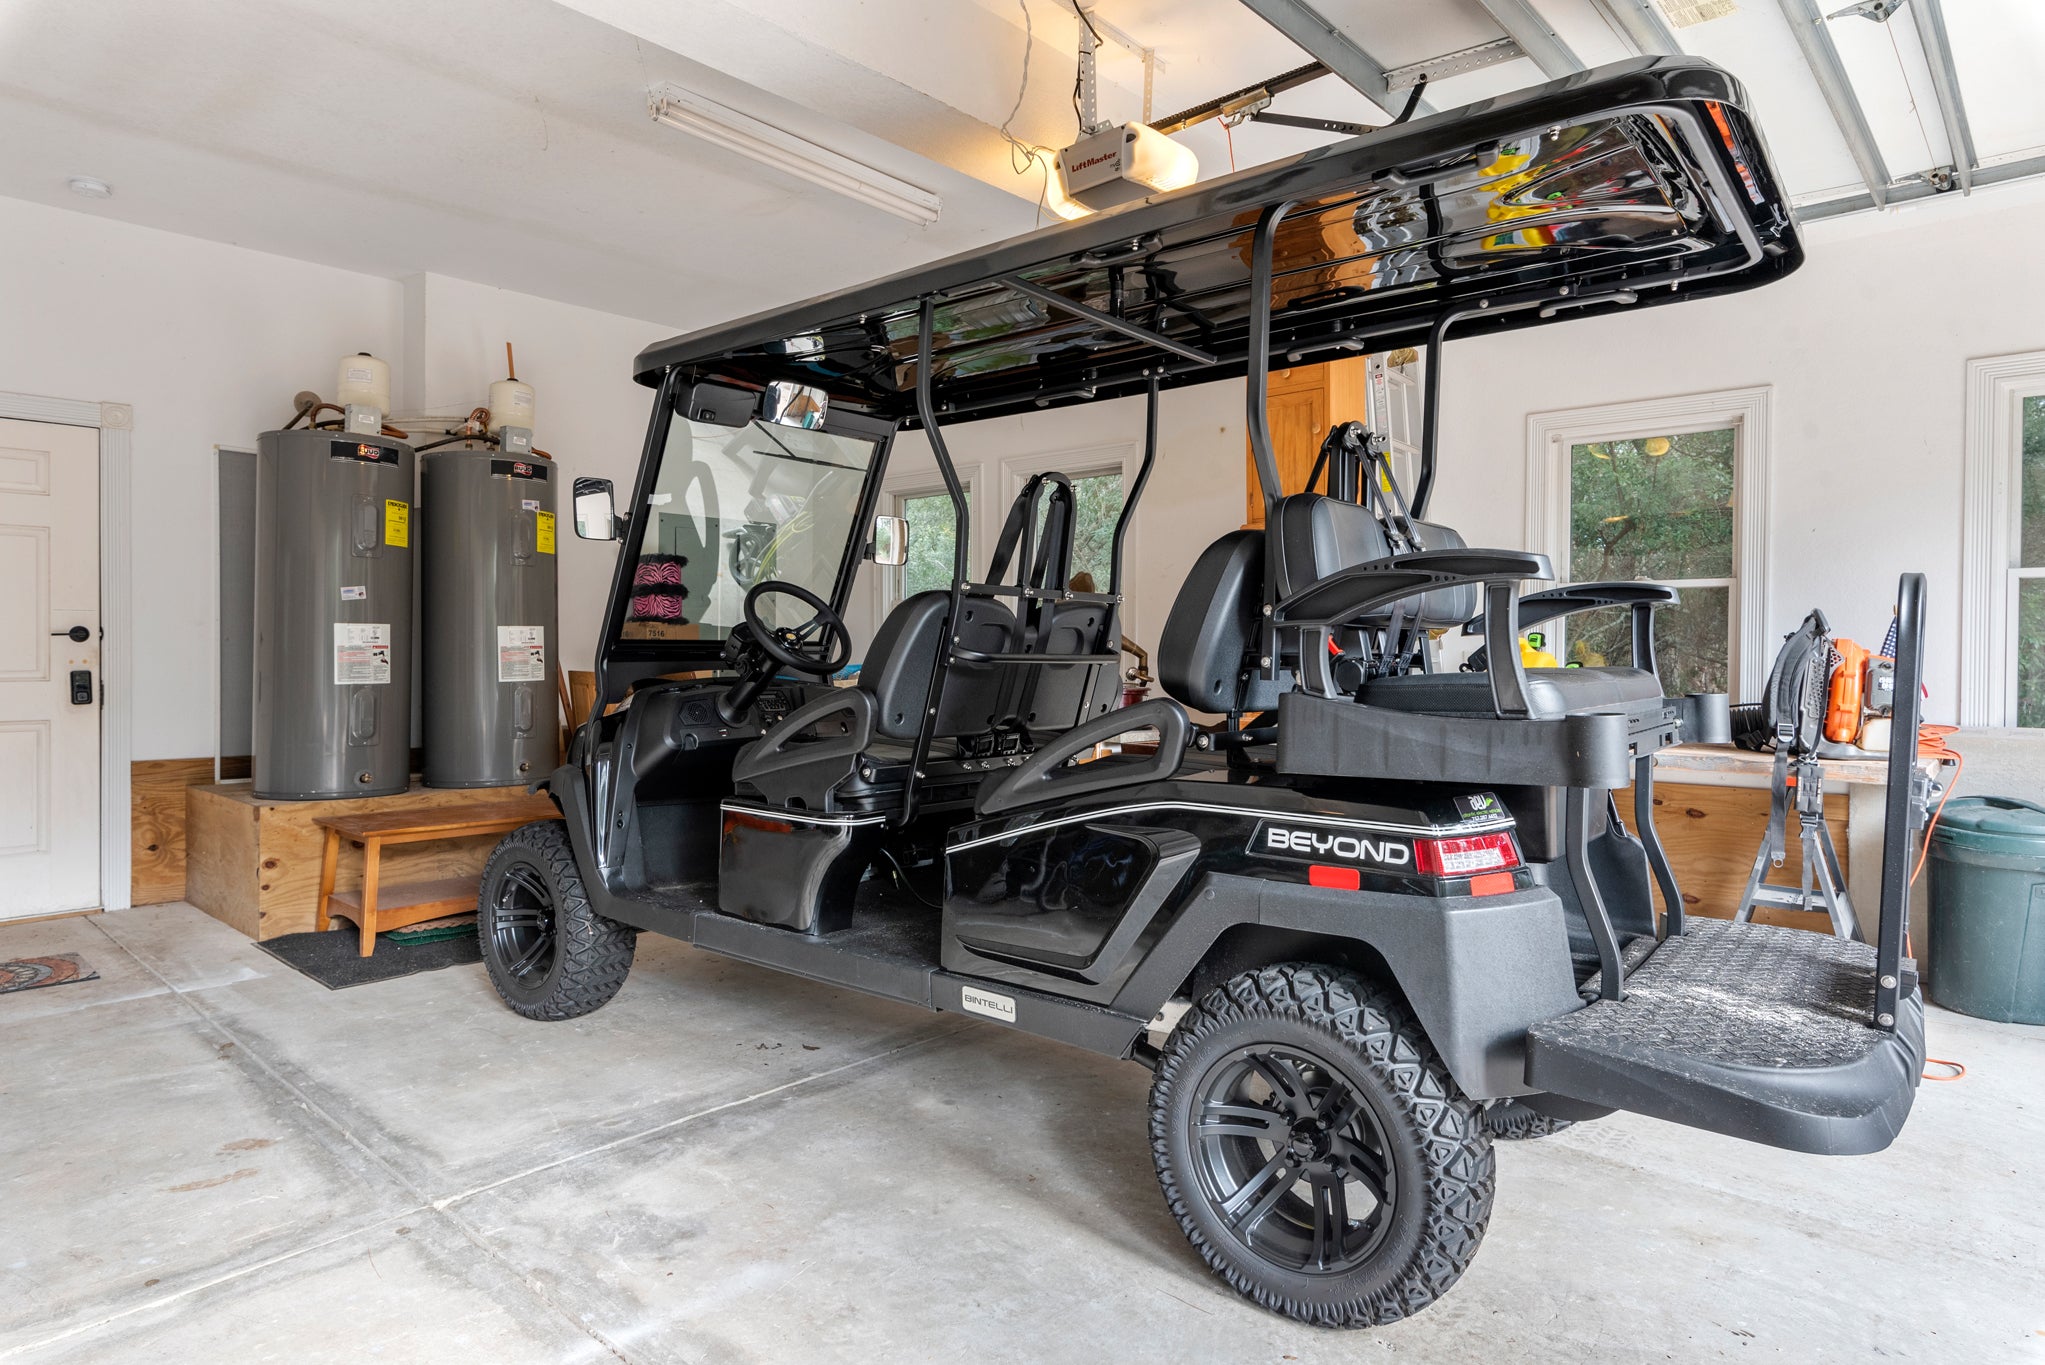 CC177: Picture This | Garage w/ Optional Golf Cart Rental